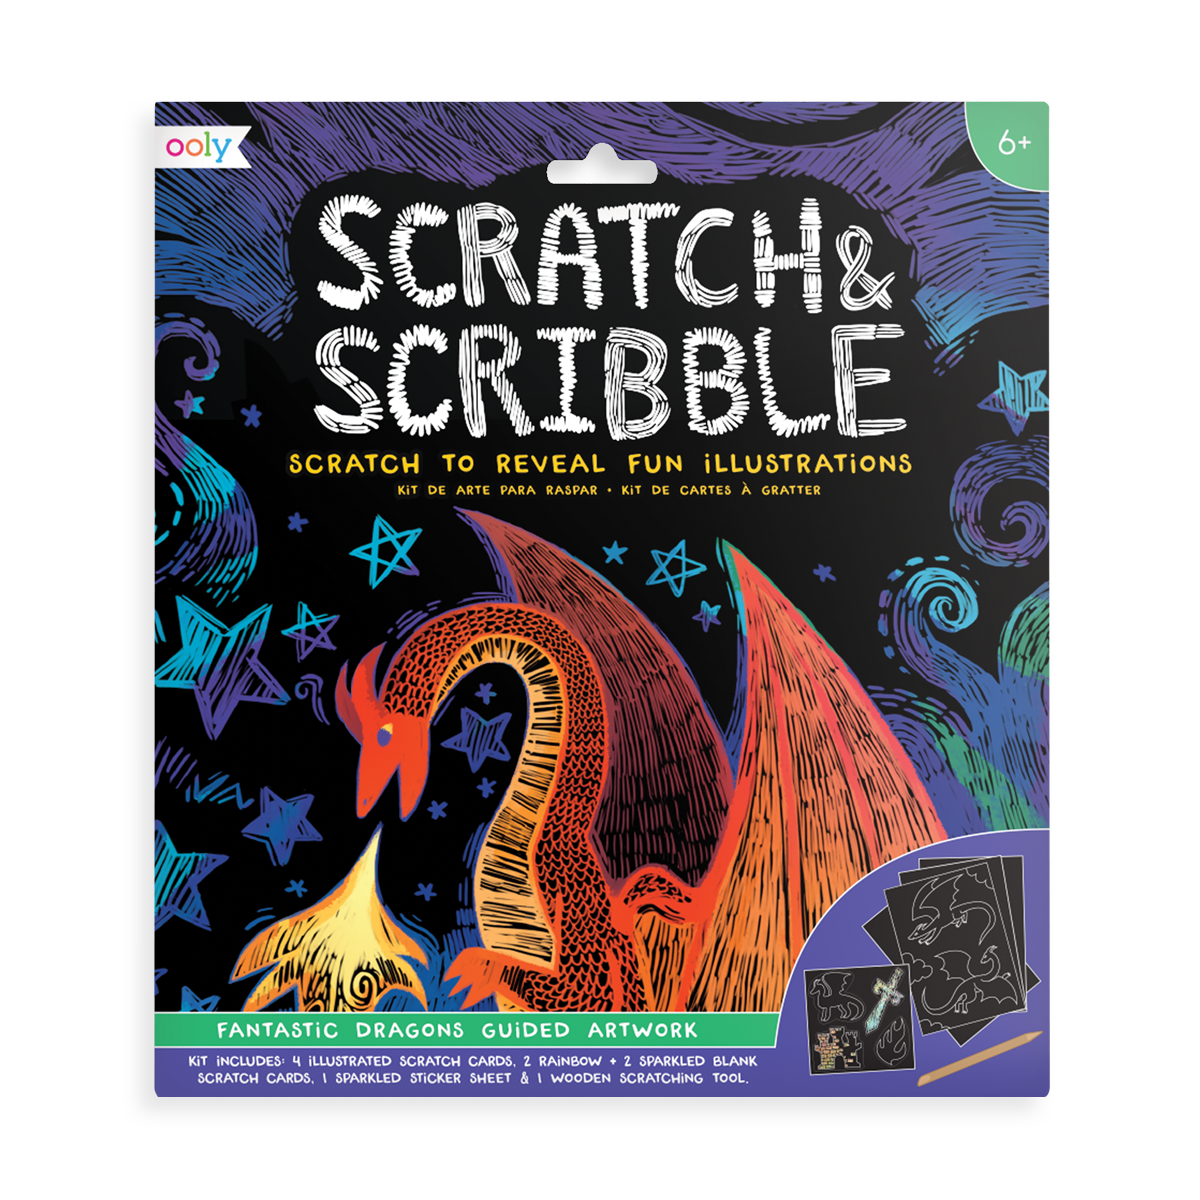 Scratch and Scribble Fantastic Dragons scratch art kit